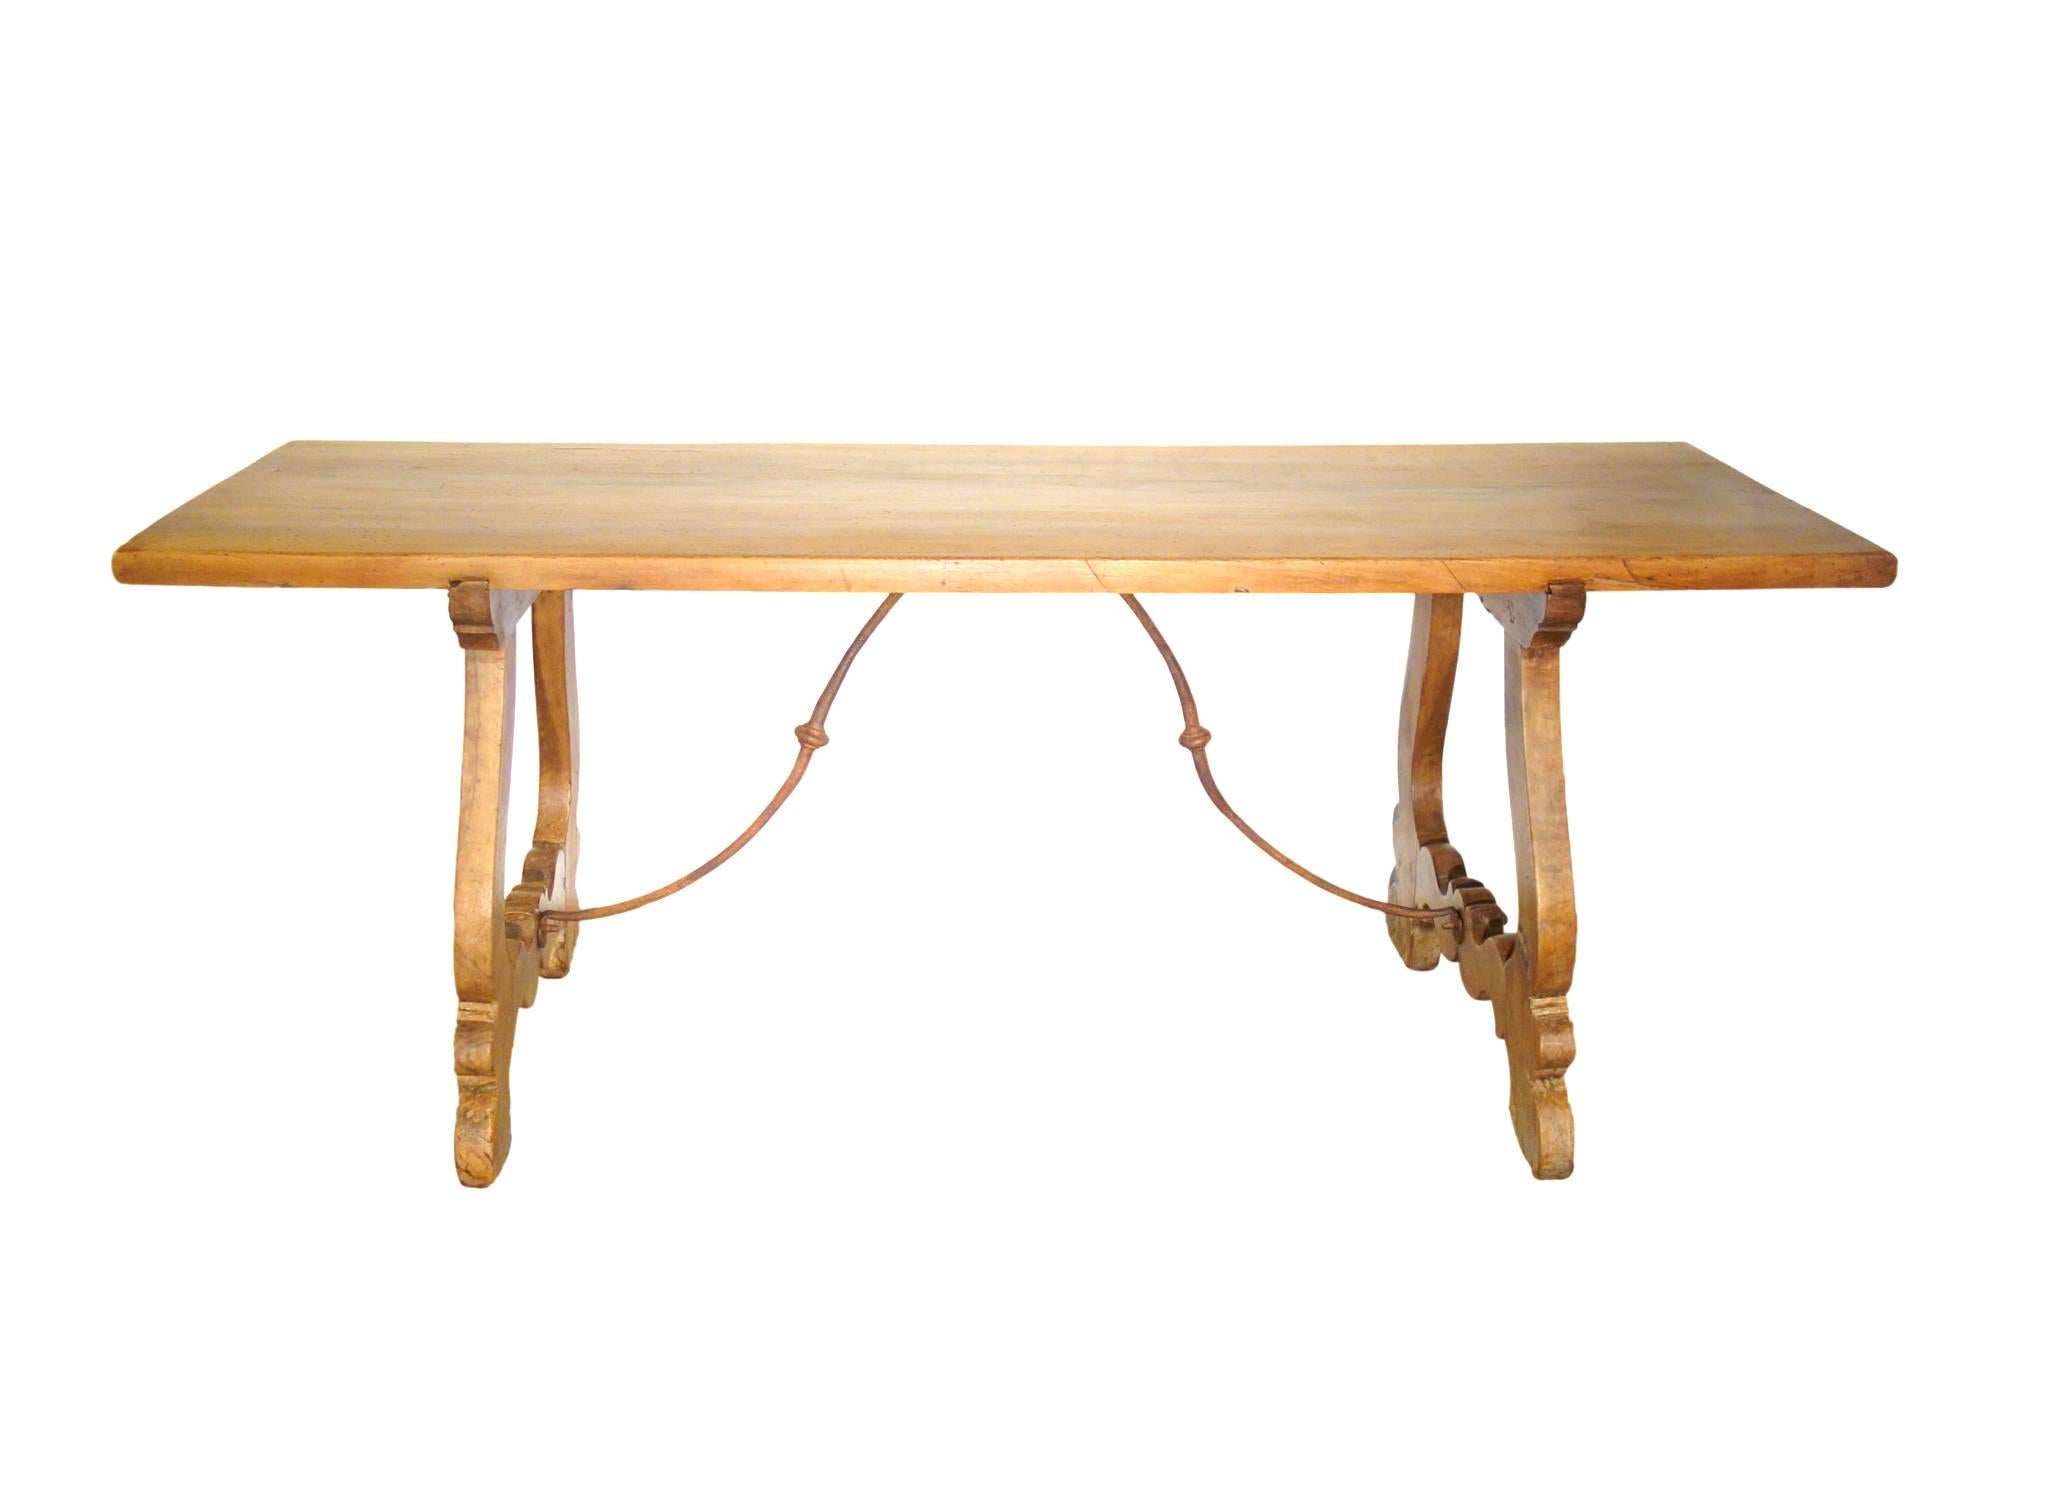 This 19th Century antique Tuscan refectory table has sold, however we feature the original antique photographed in this listing as our reproduction prototype for our authentic Italian antique reproduction program.
Available in Natural Blonde Italian